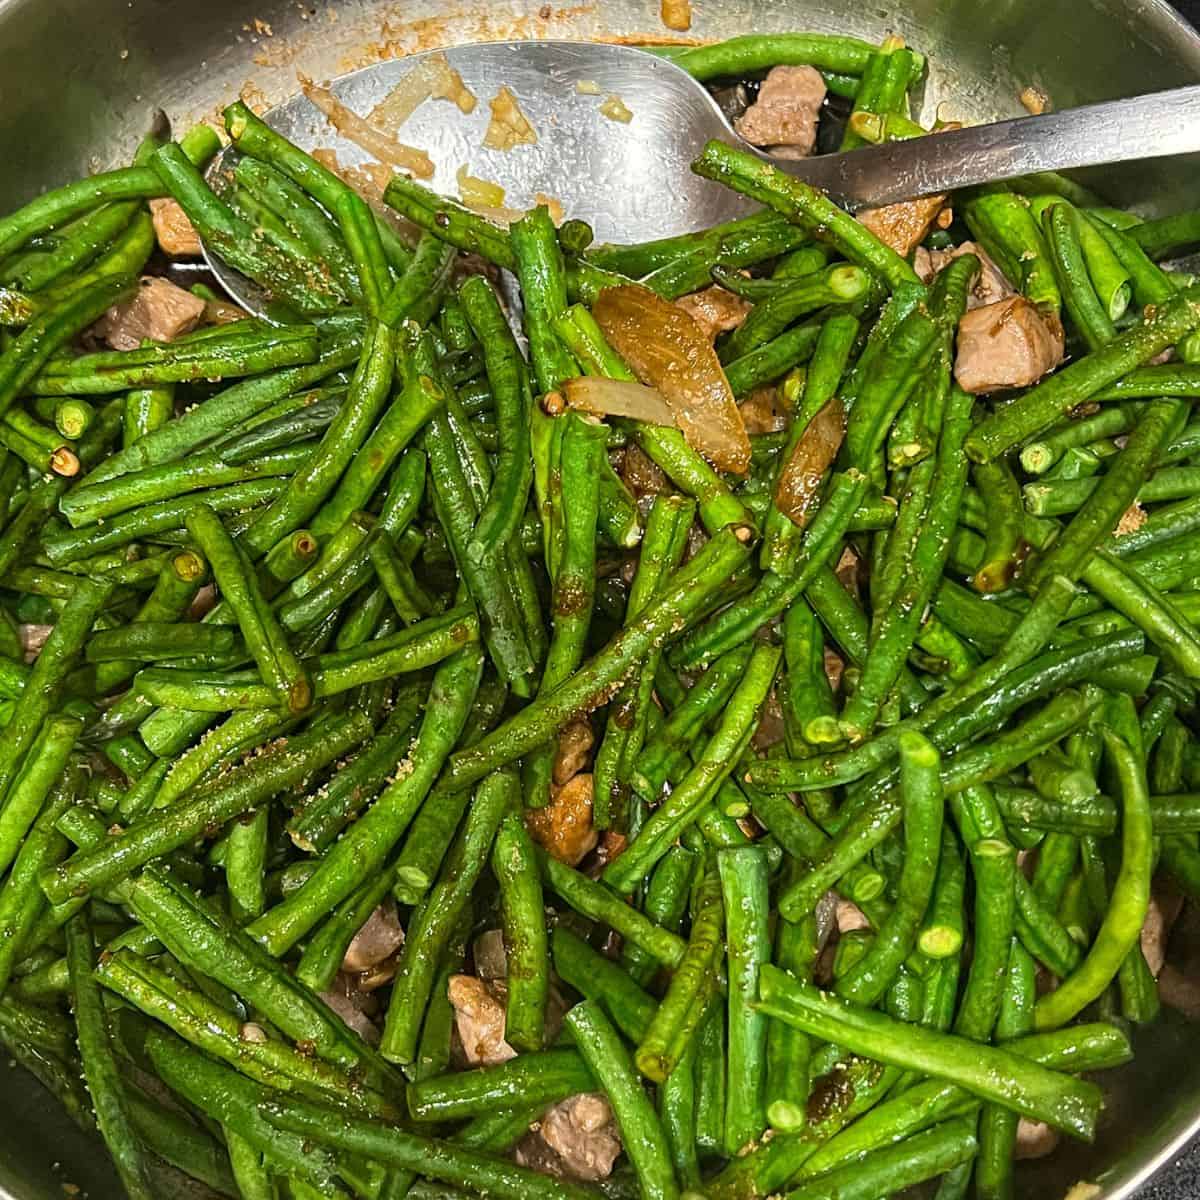 Adding string beans, soy sauce, and brown sugar. Toss to combine.